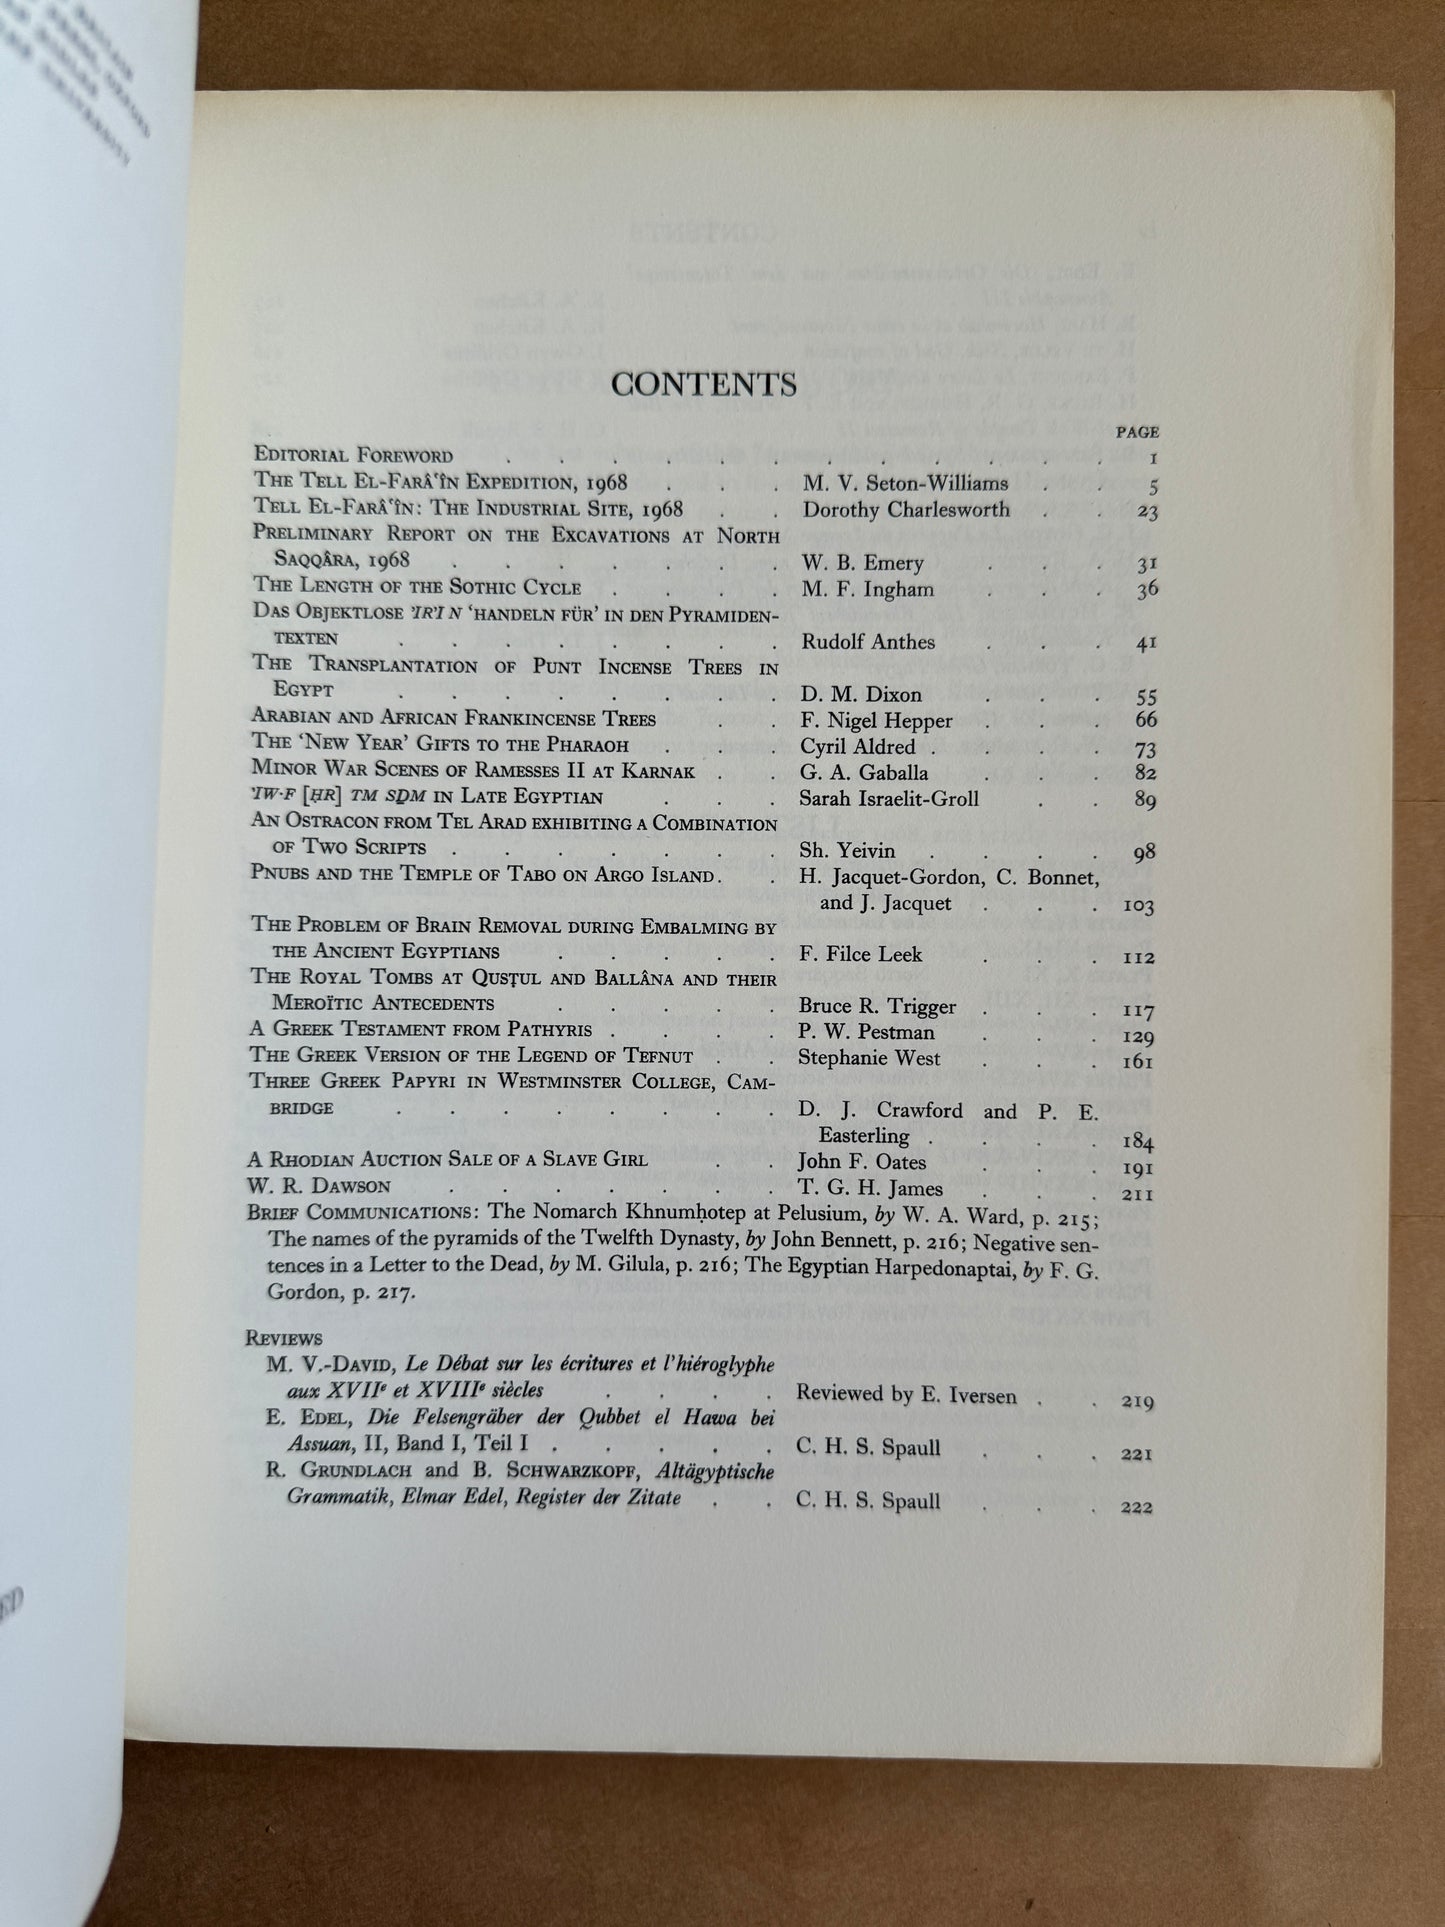 The Journal of Egyptian Archaeology; Vol 55 ; August 1969